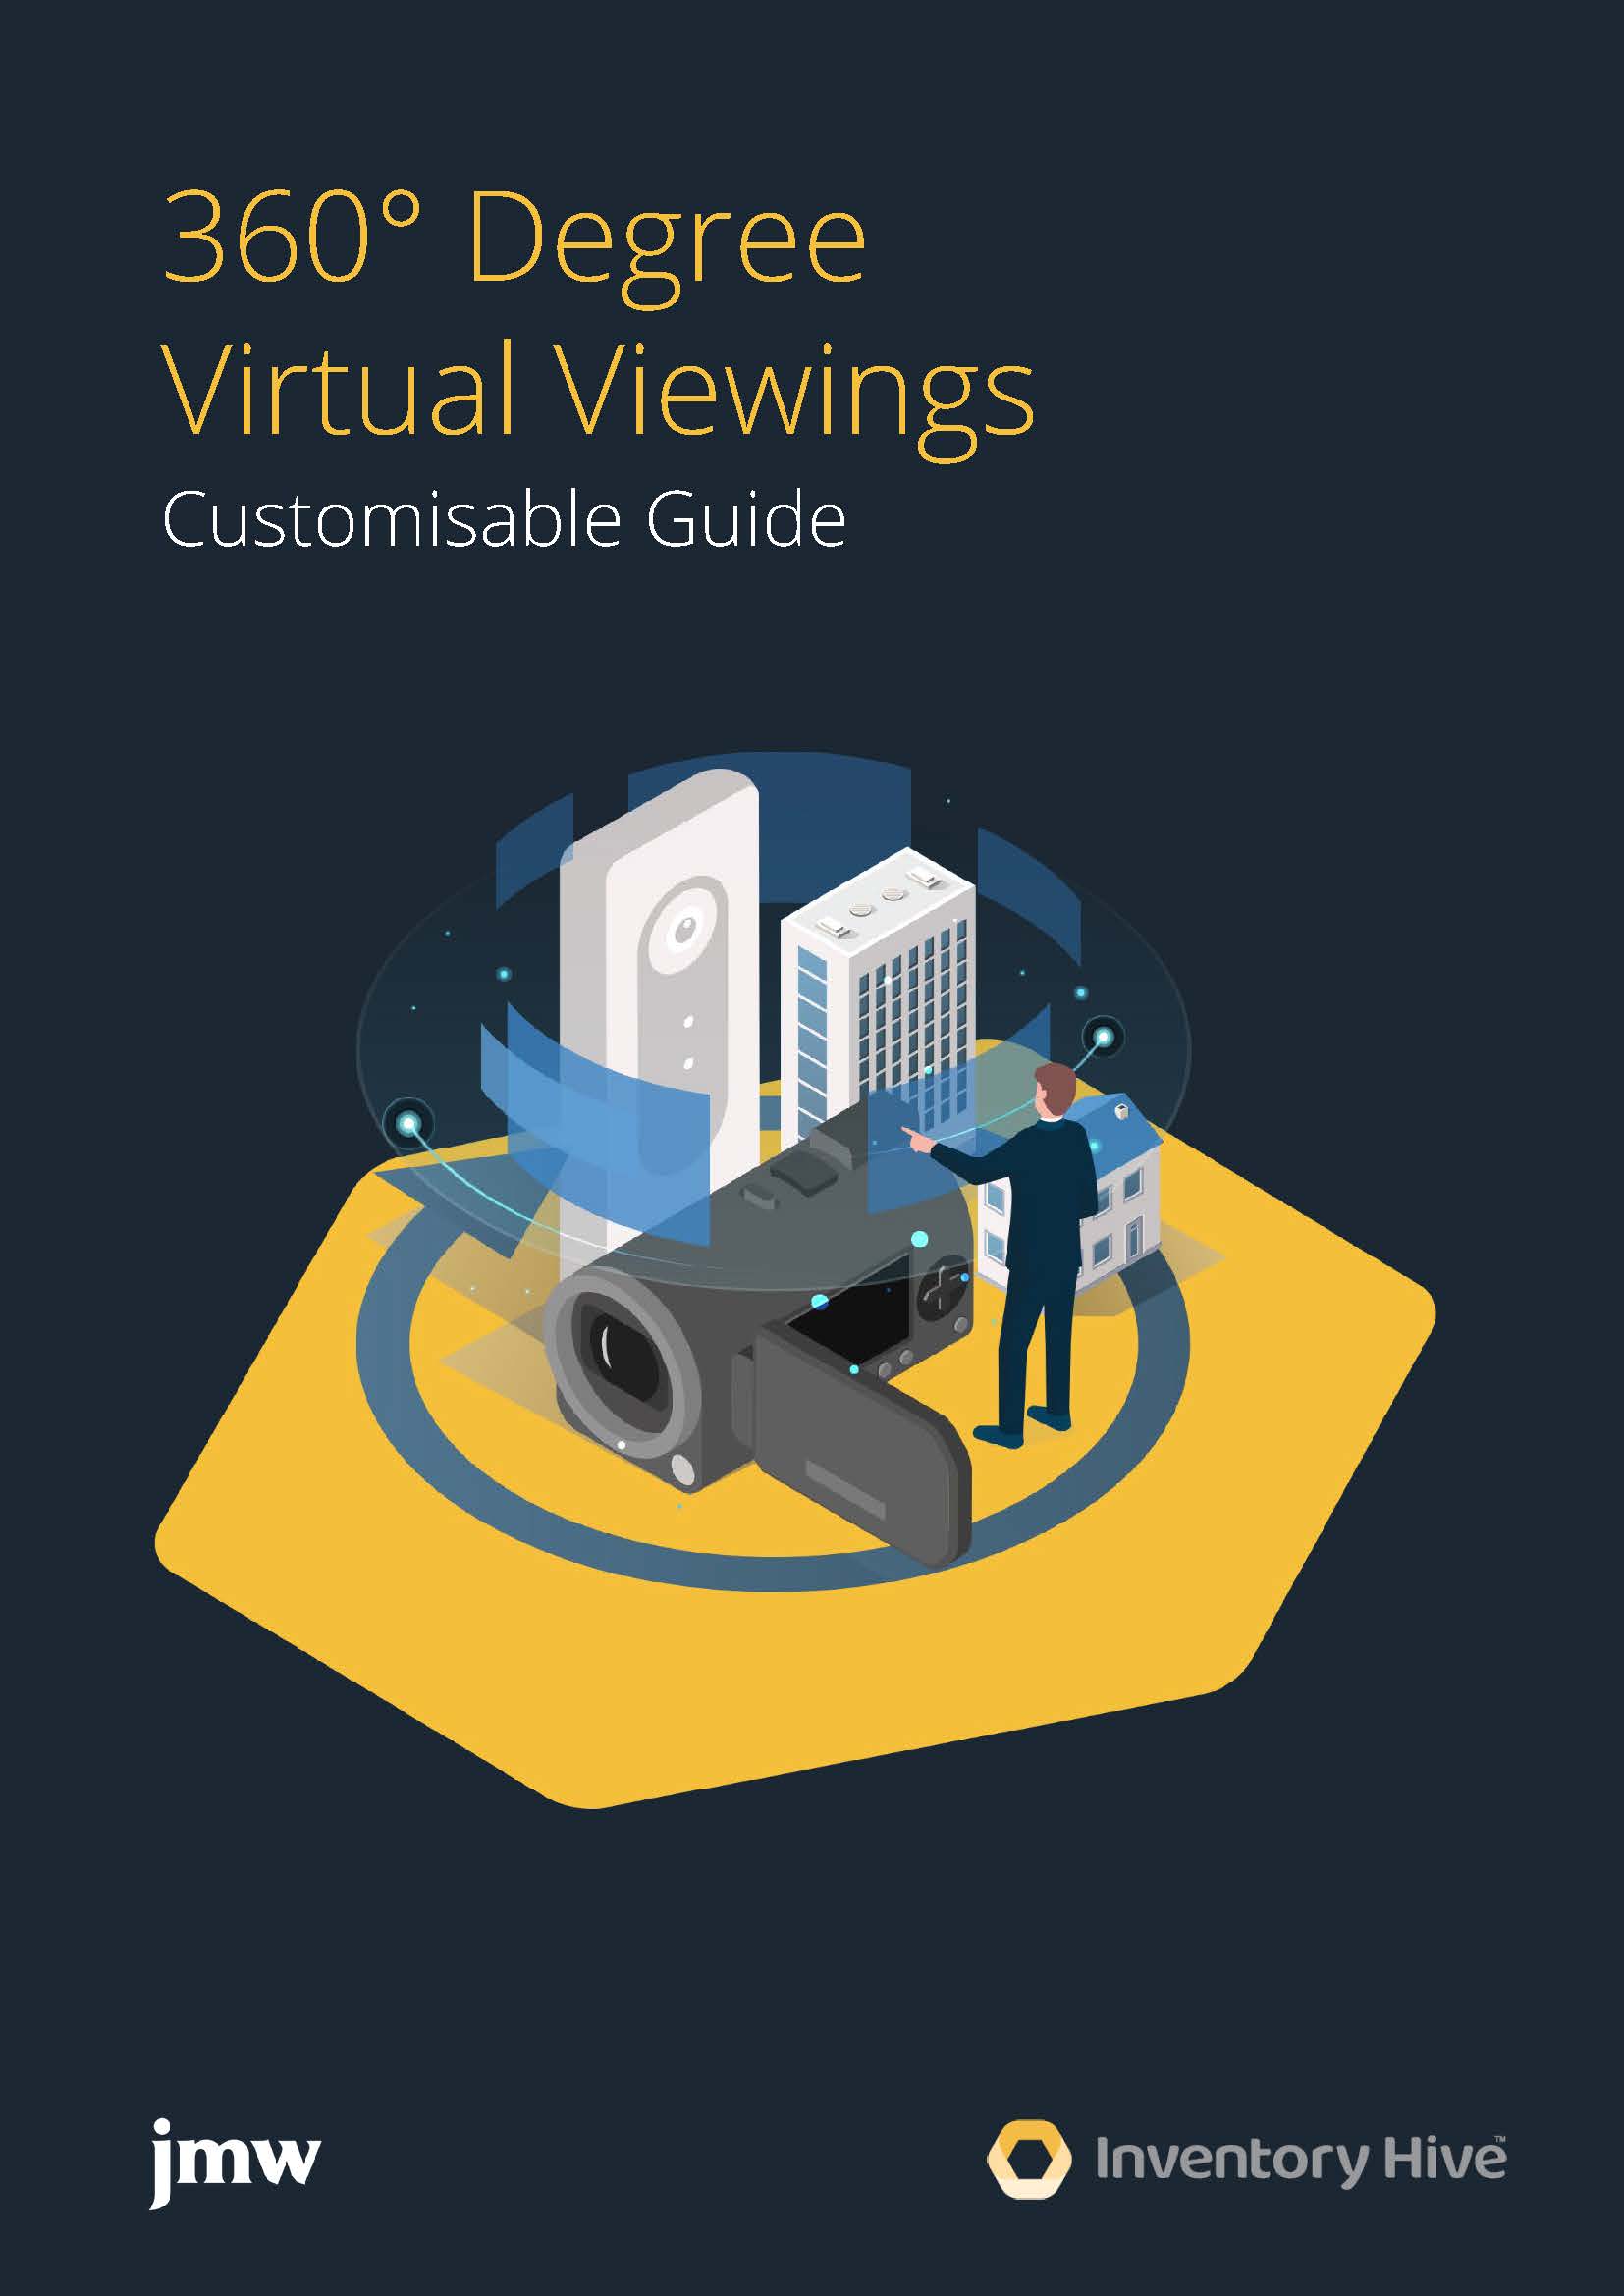 360° Degree Virtual Viewings Customisable Guide